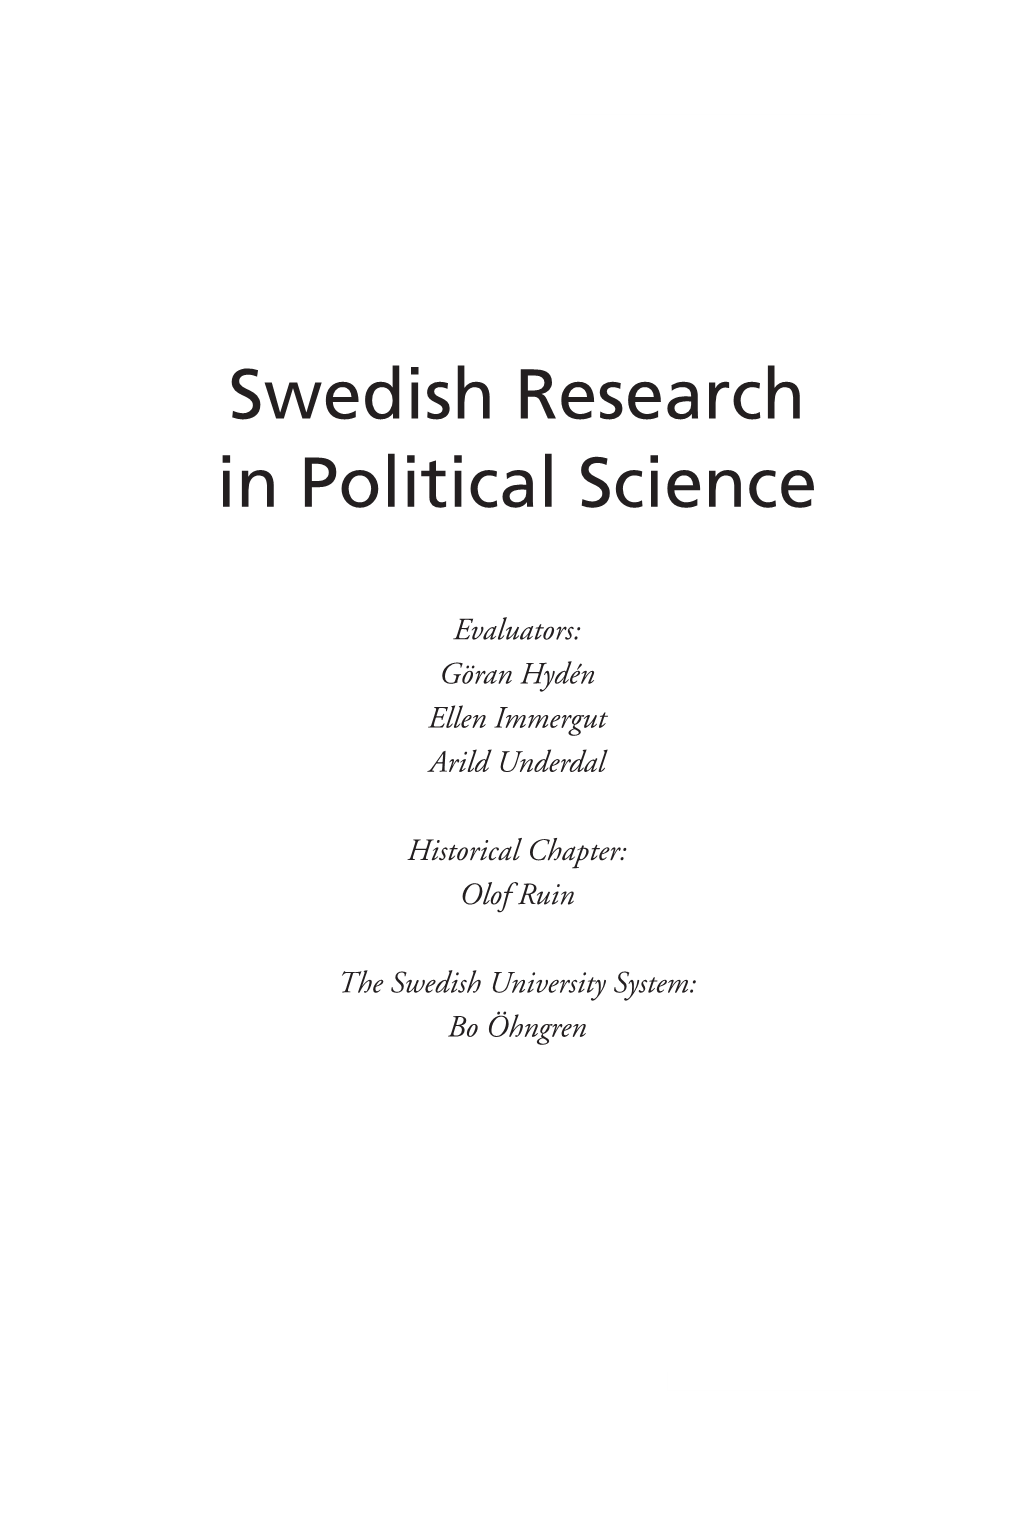 Swedish Research in Political Science